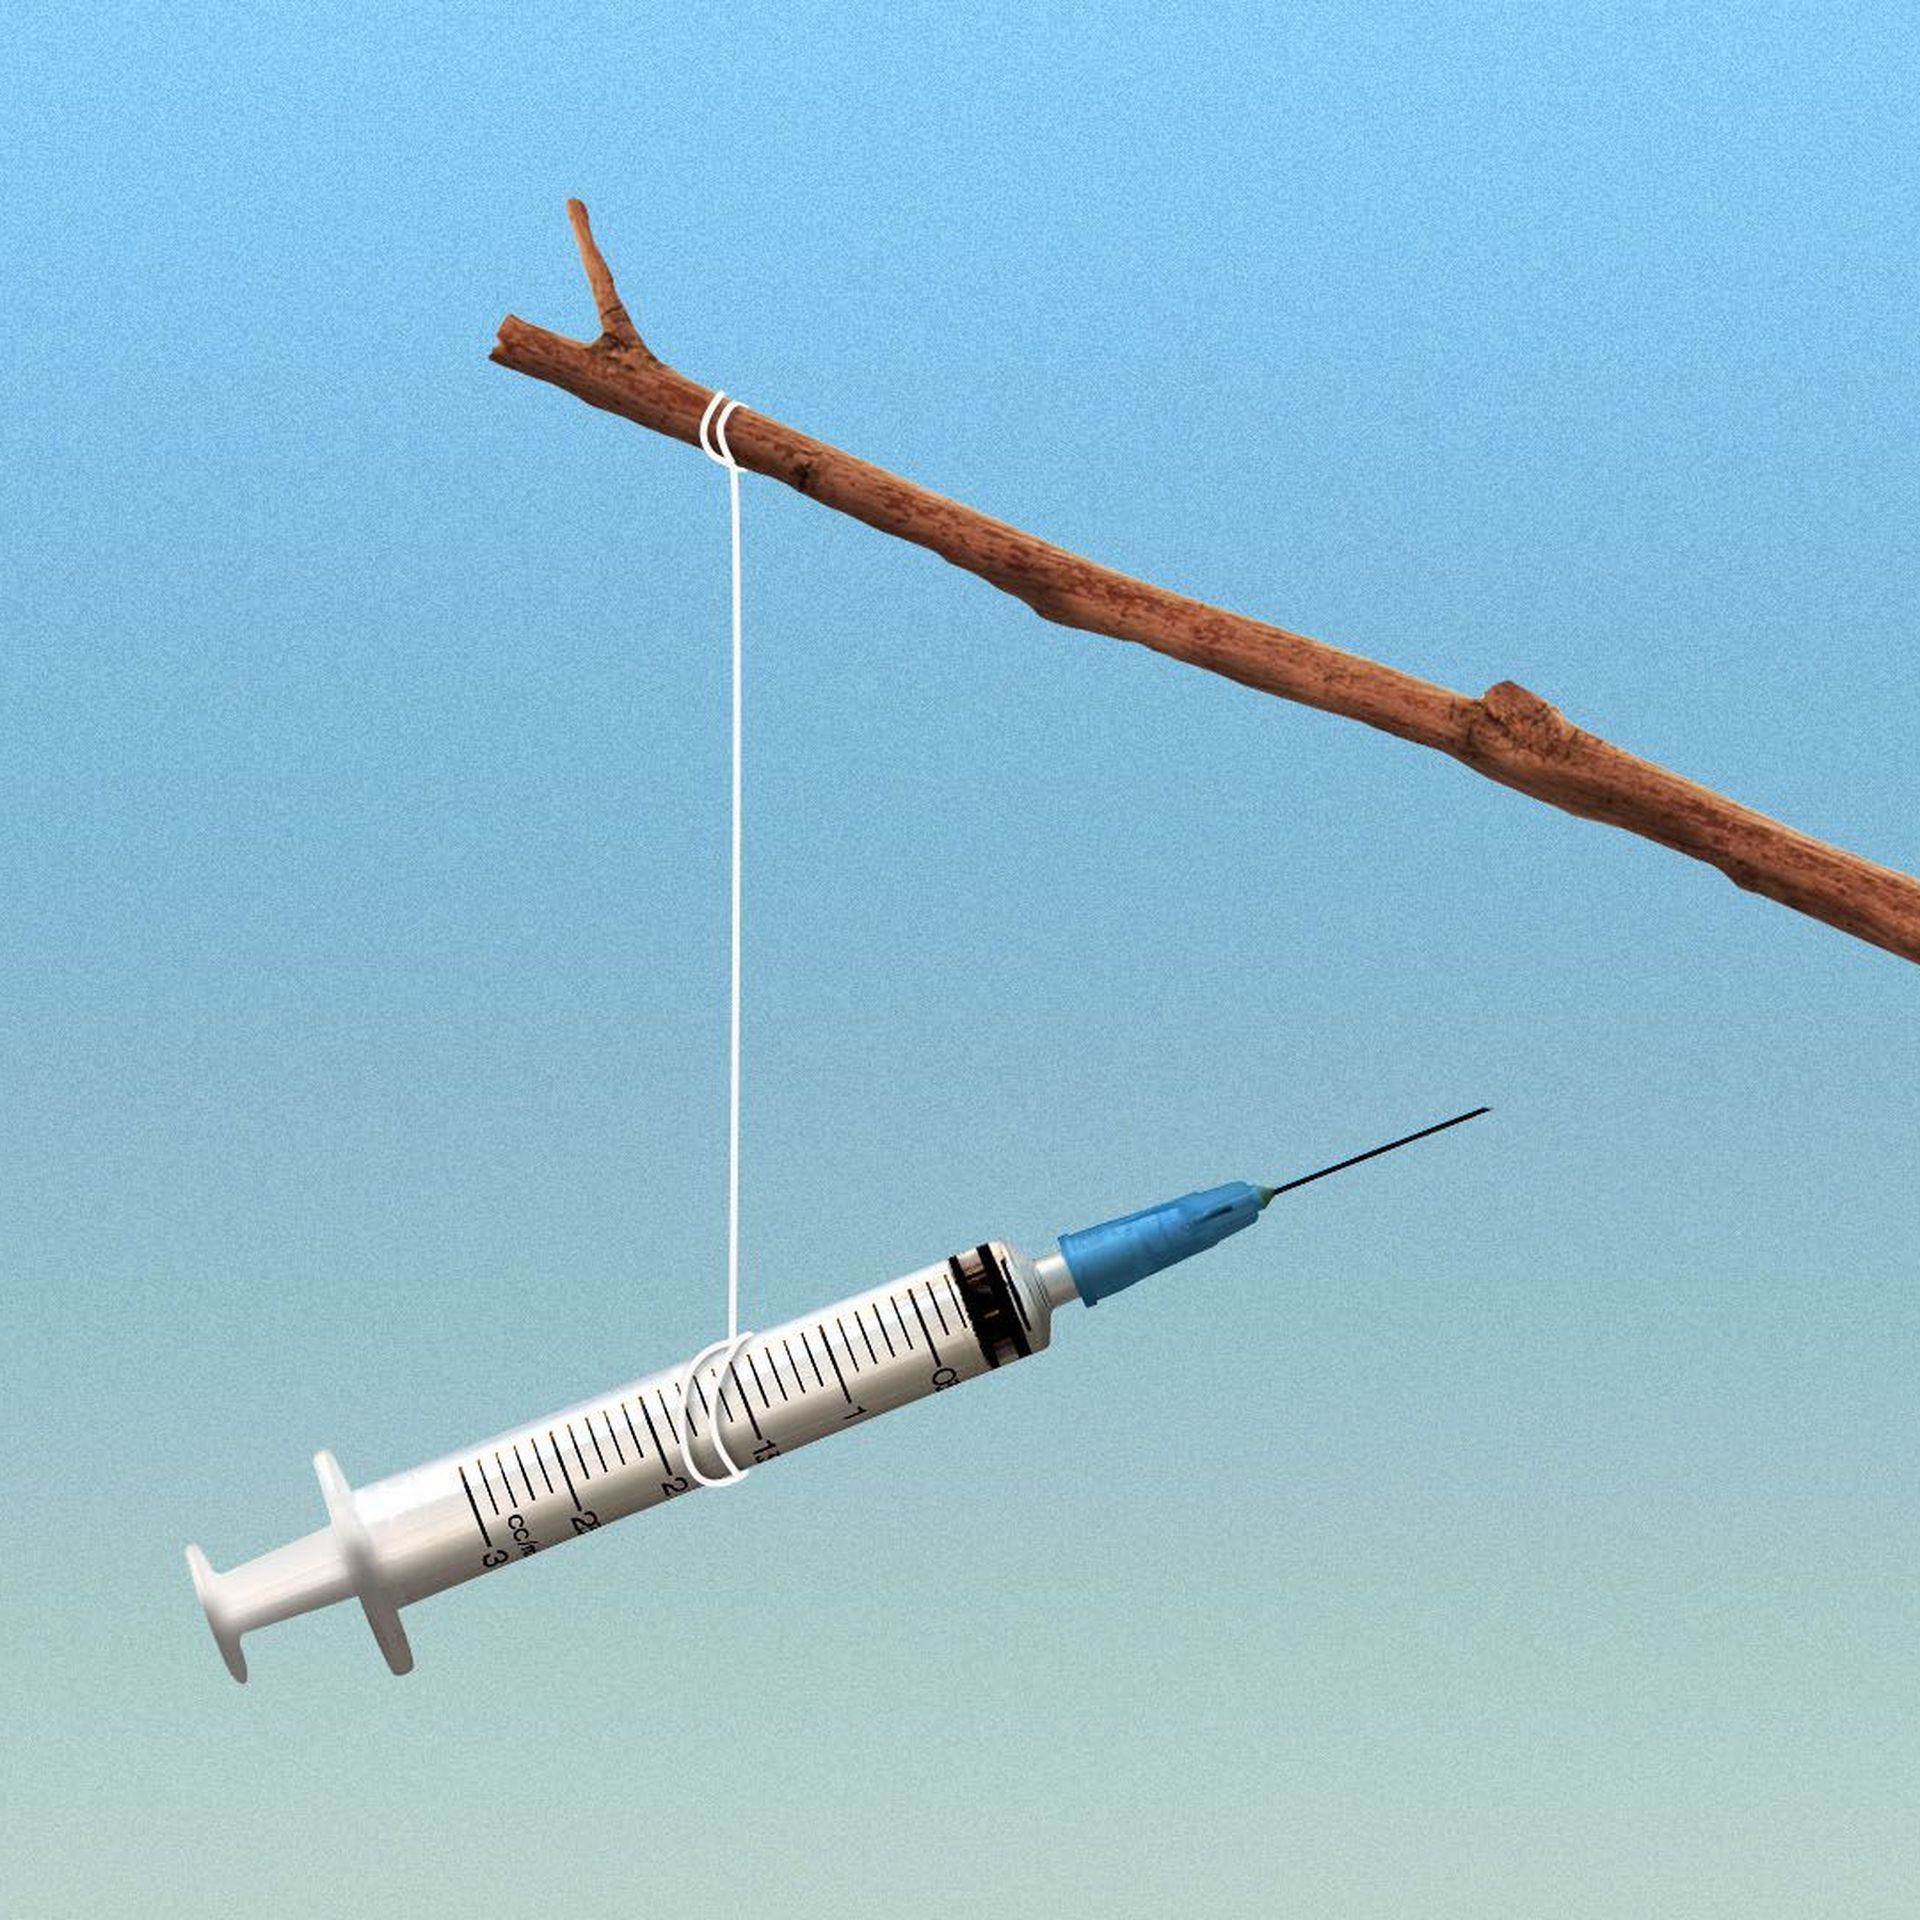 Illustration of a syringe tied to a string on a stick